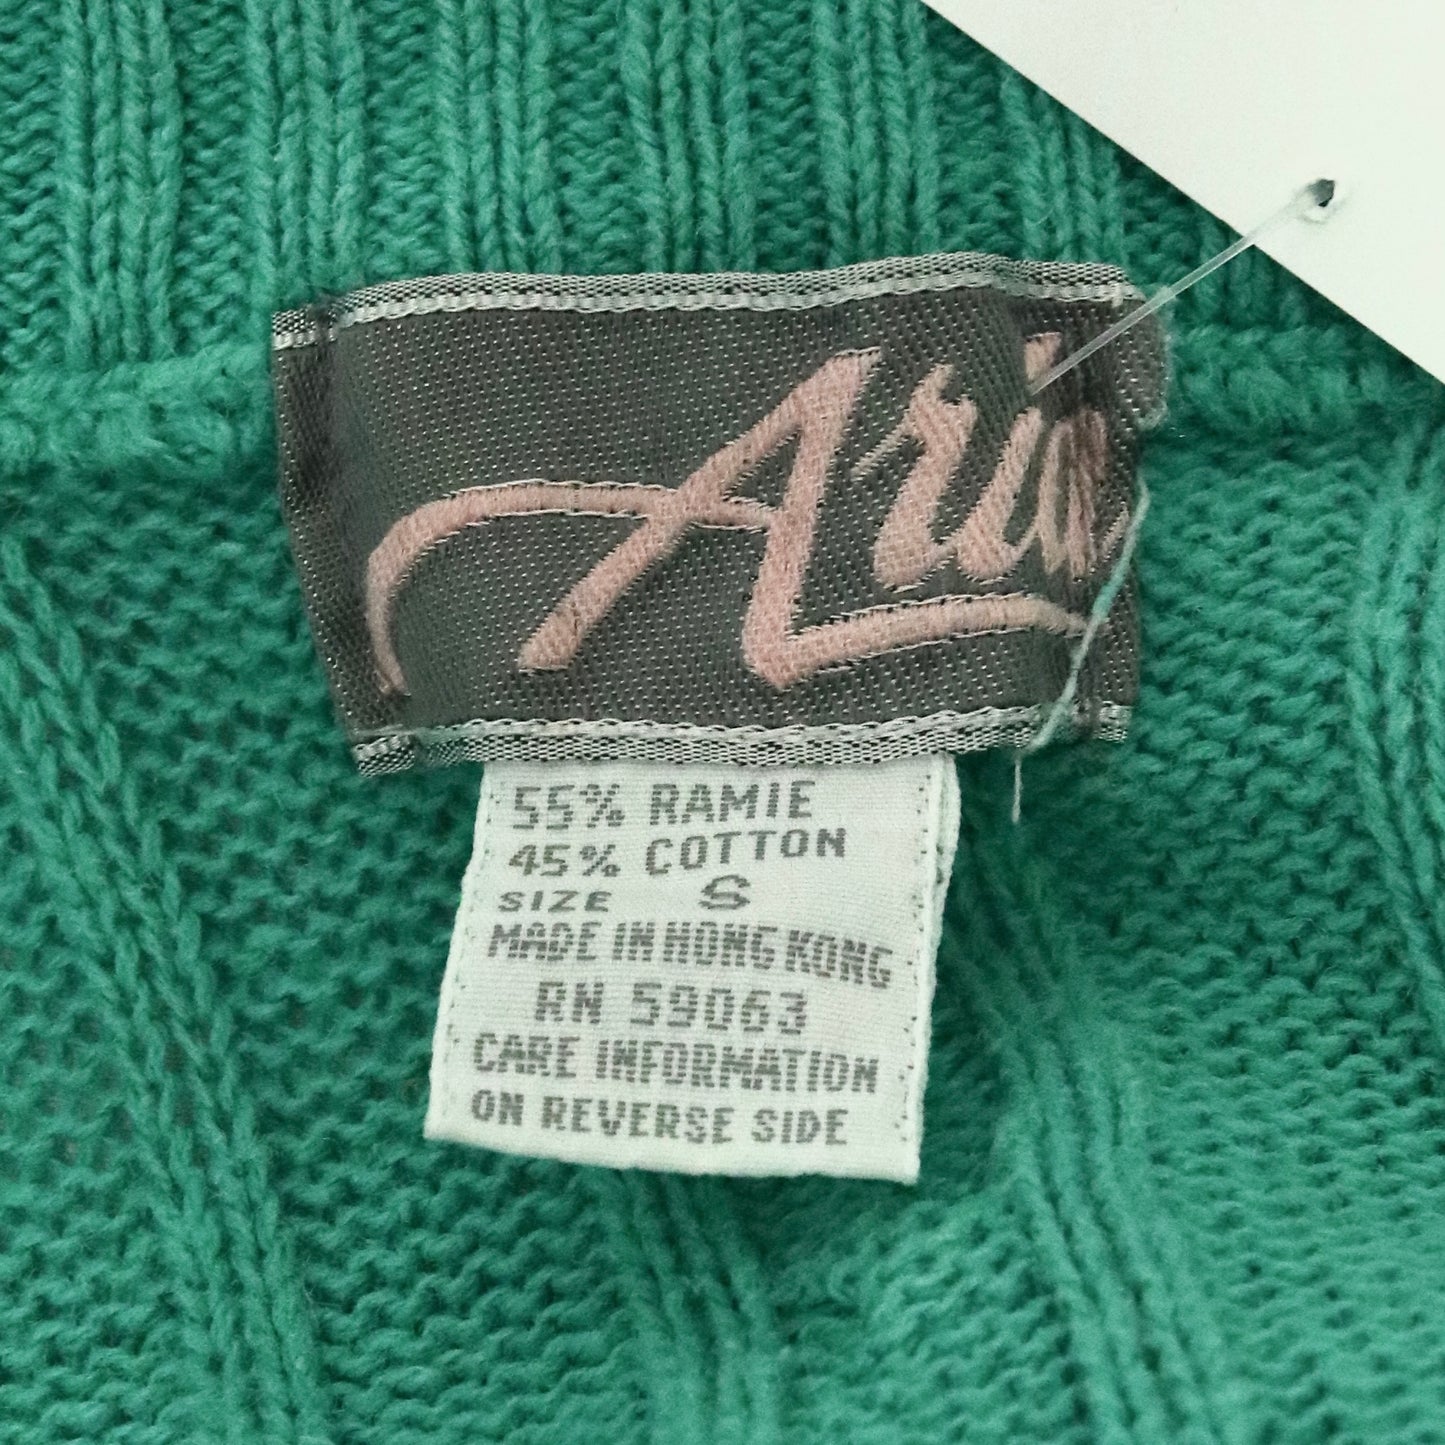 90's "Aria" knit long one-piece